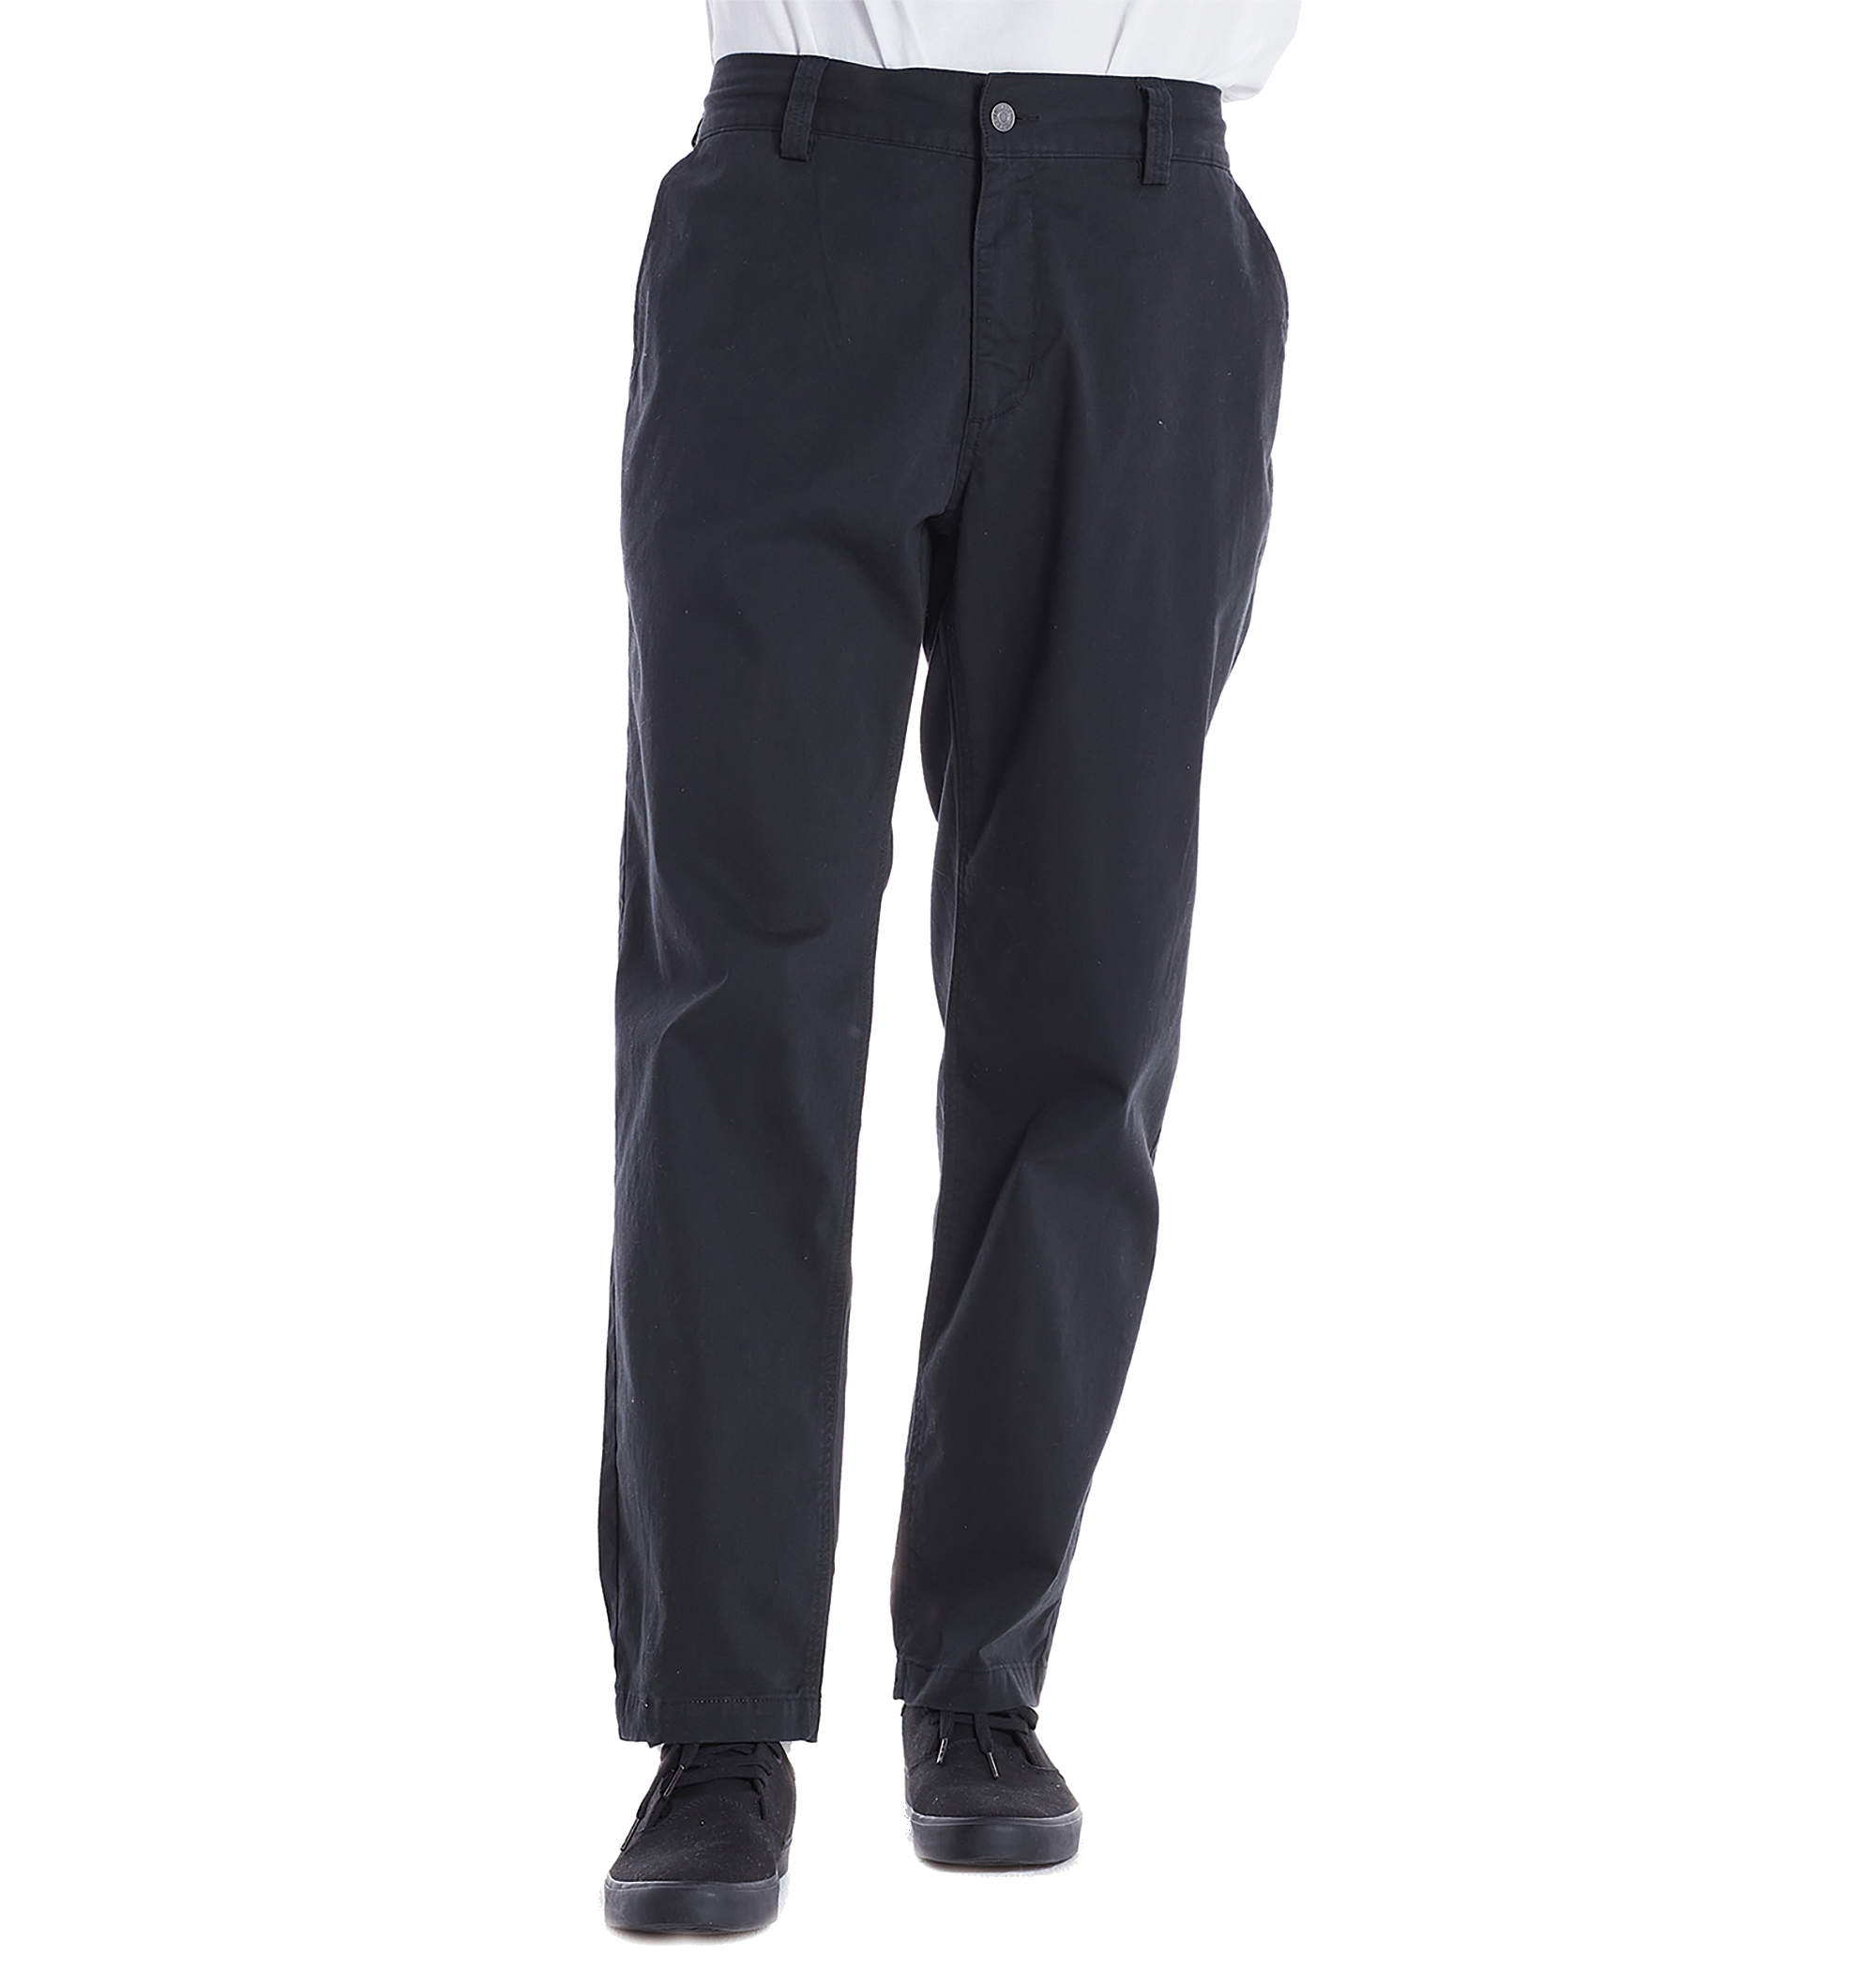 ＜Quiksilver＞ SURF2SKATE LAZY PANTS ストレッチ性のあるチノ素材を使用